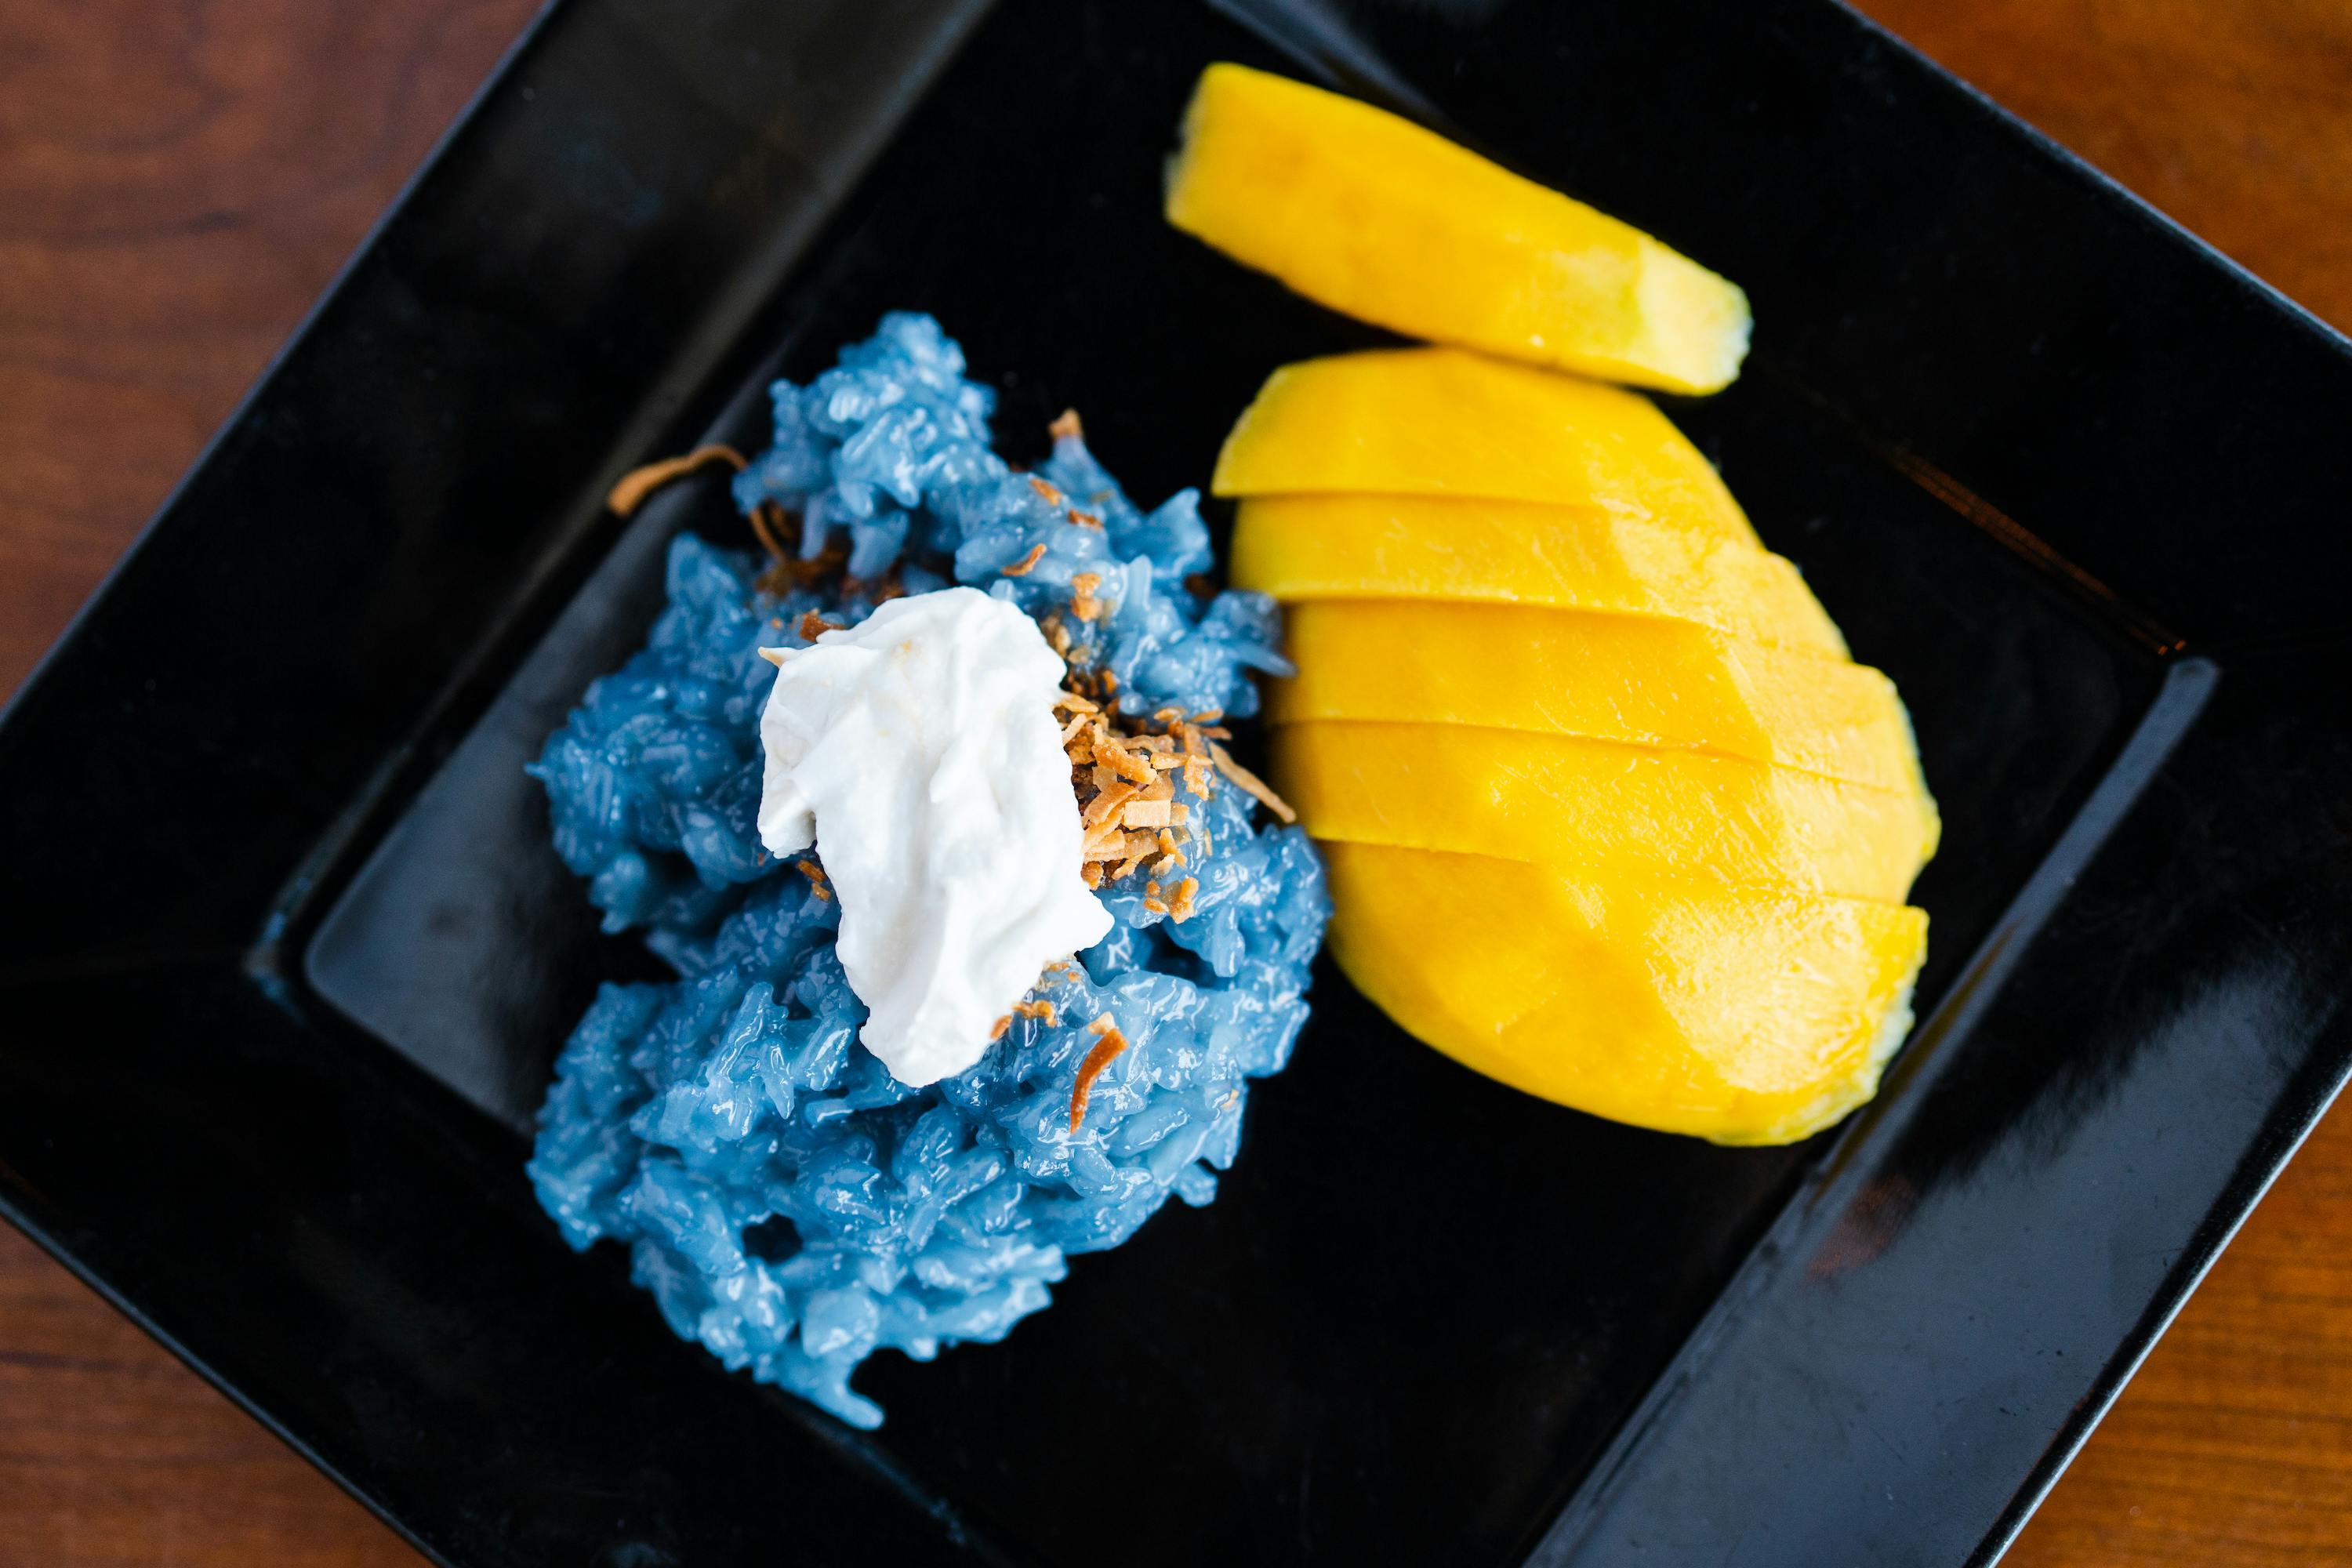 Sweet Rice with Mango from City Thai Cuisine in Portland, OR